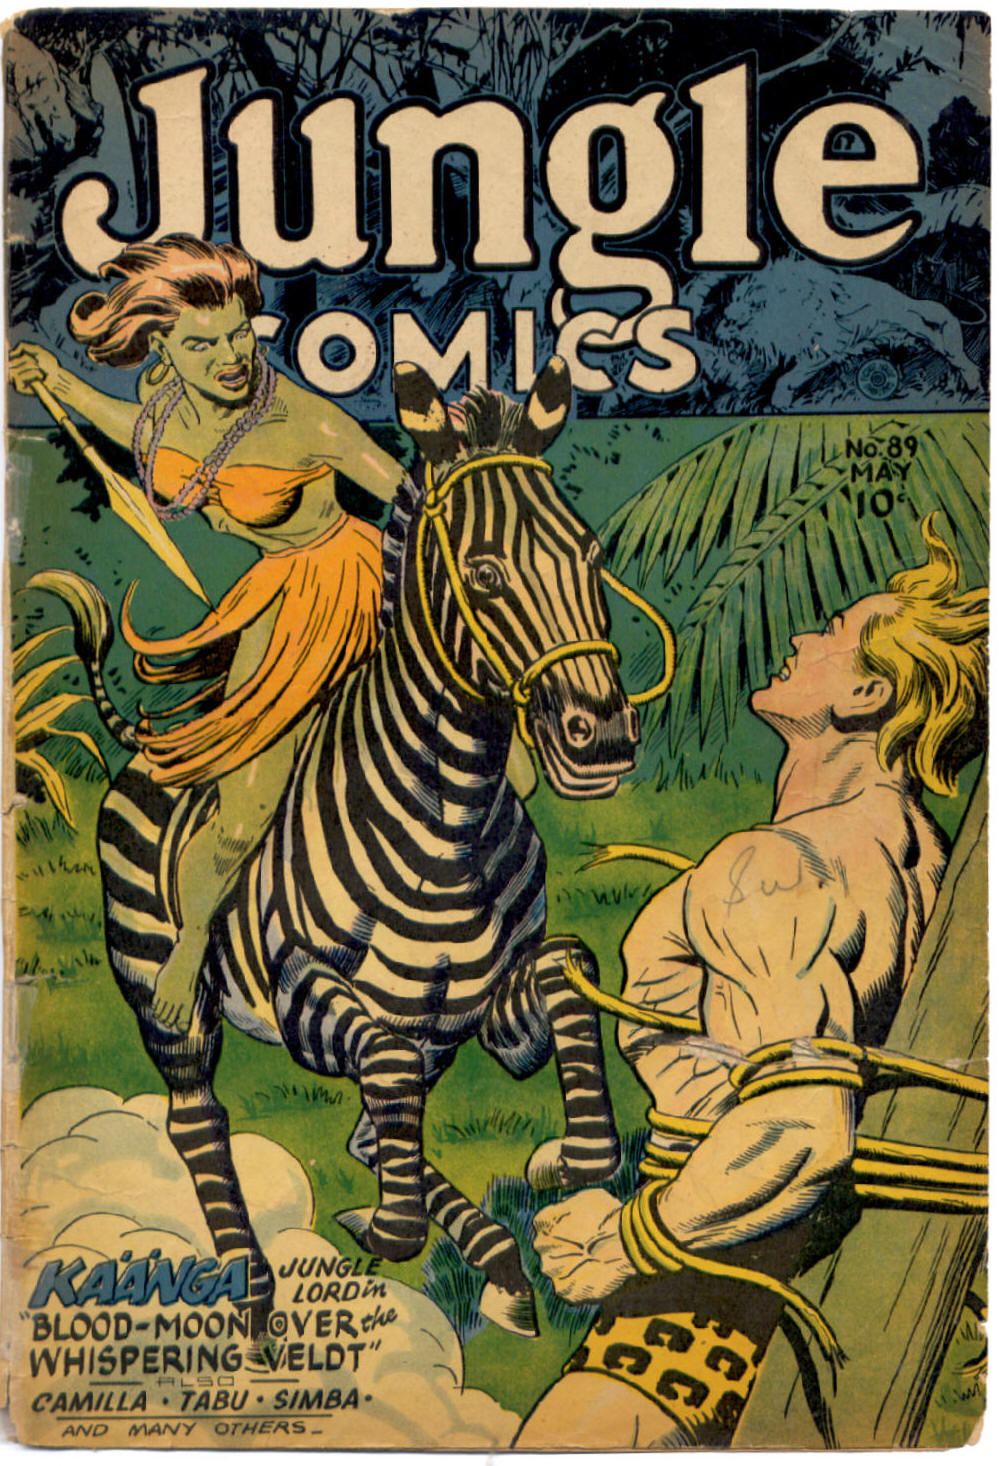 cover from jungle comics #89